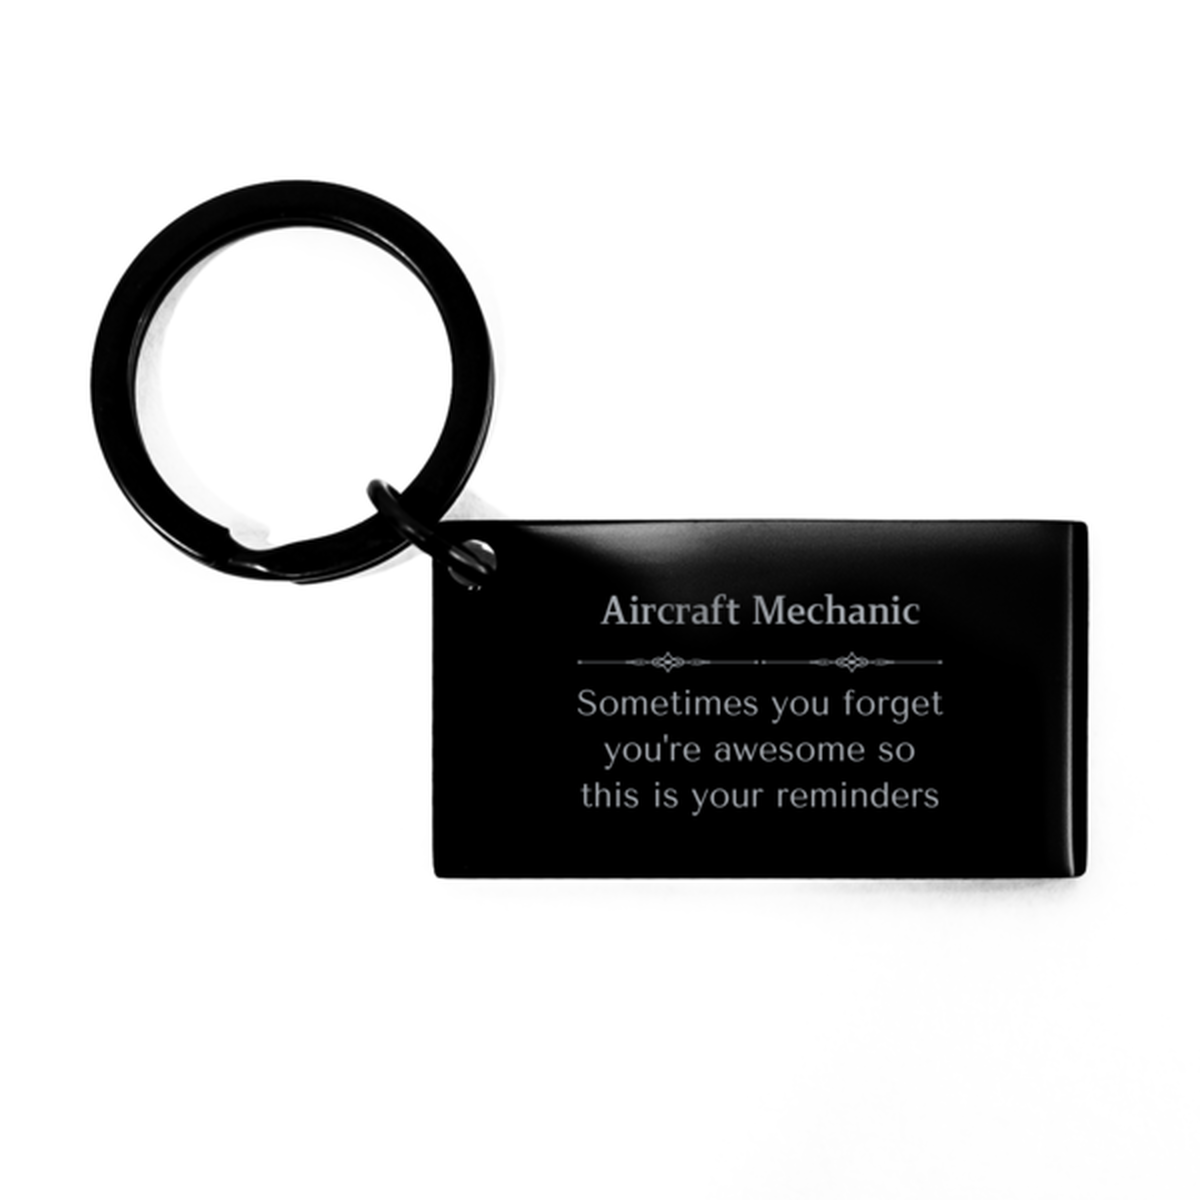 Sentimental Aircraft Mechanic Keychain, Childcare Worker Sometimes you forget you're awesome so this is your reminders, Graduation Christmas Birthday Gifts for Aircraft Mechanic, Men, Women, Coworkers